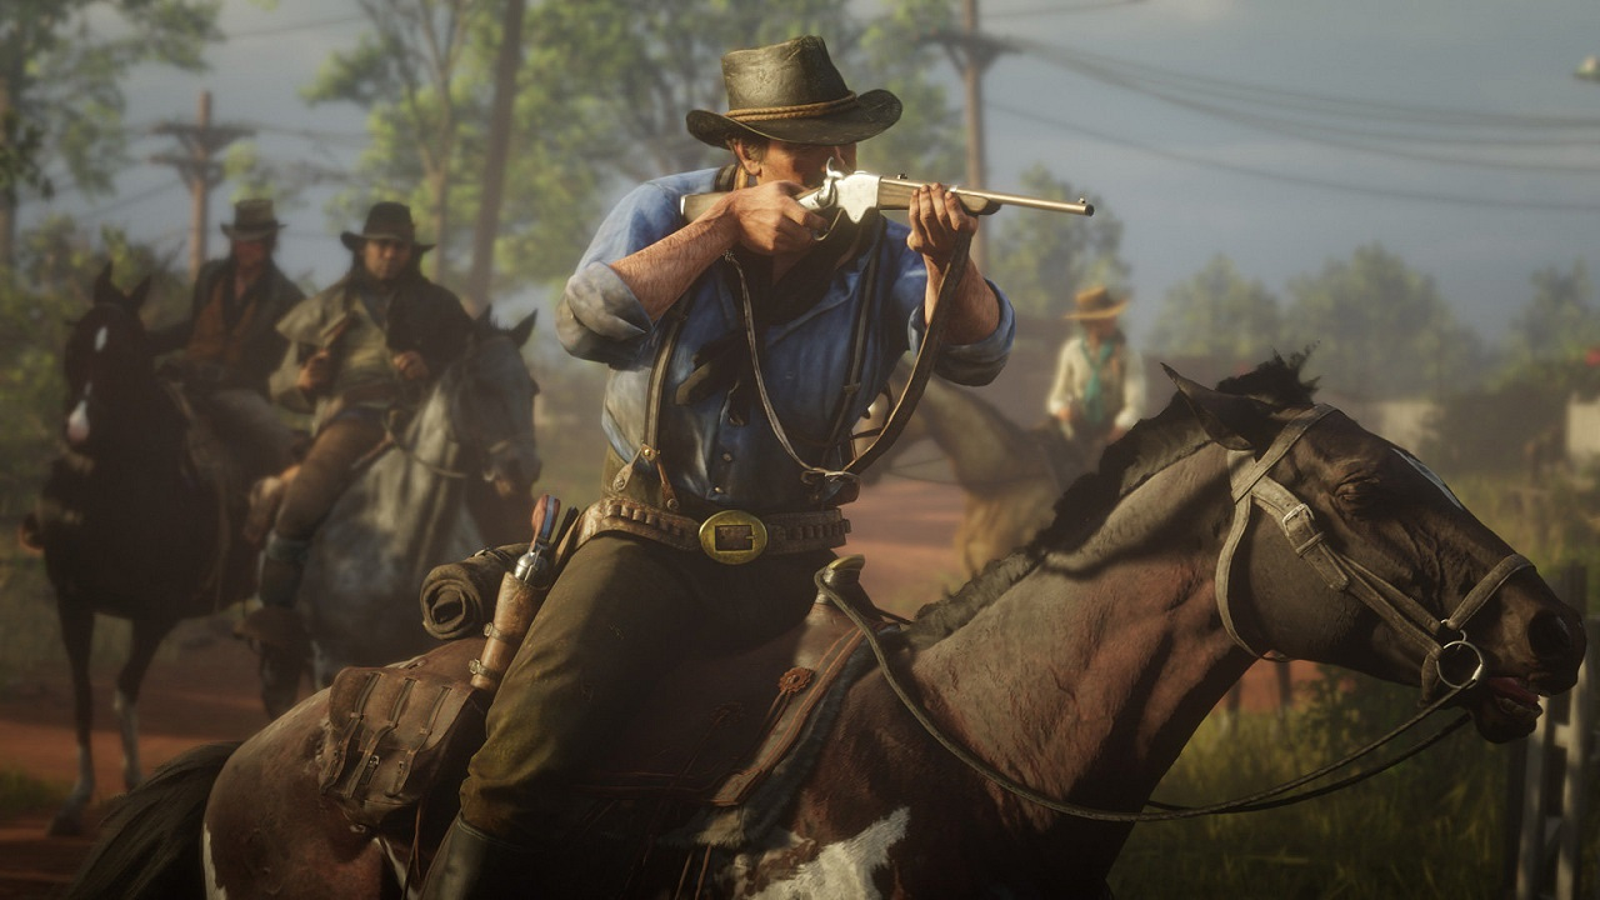 Buy Red Dead Redemption 2 from the Humble Store